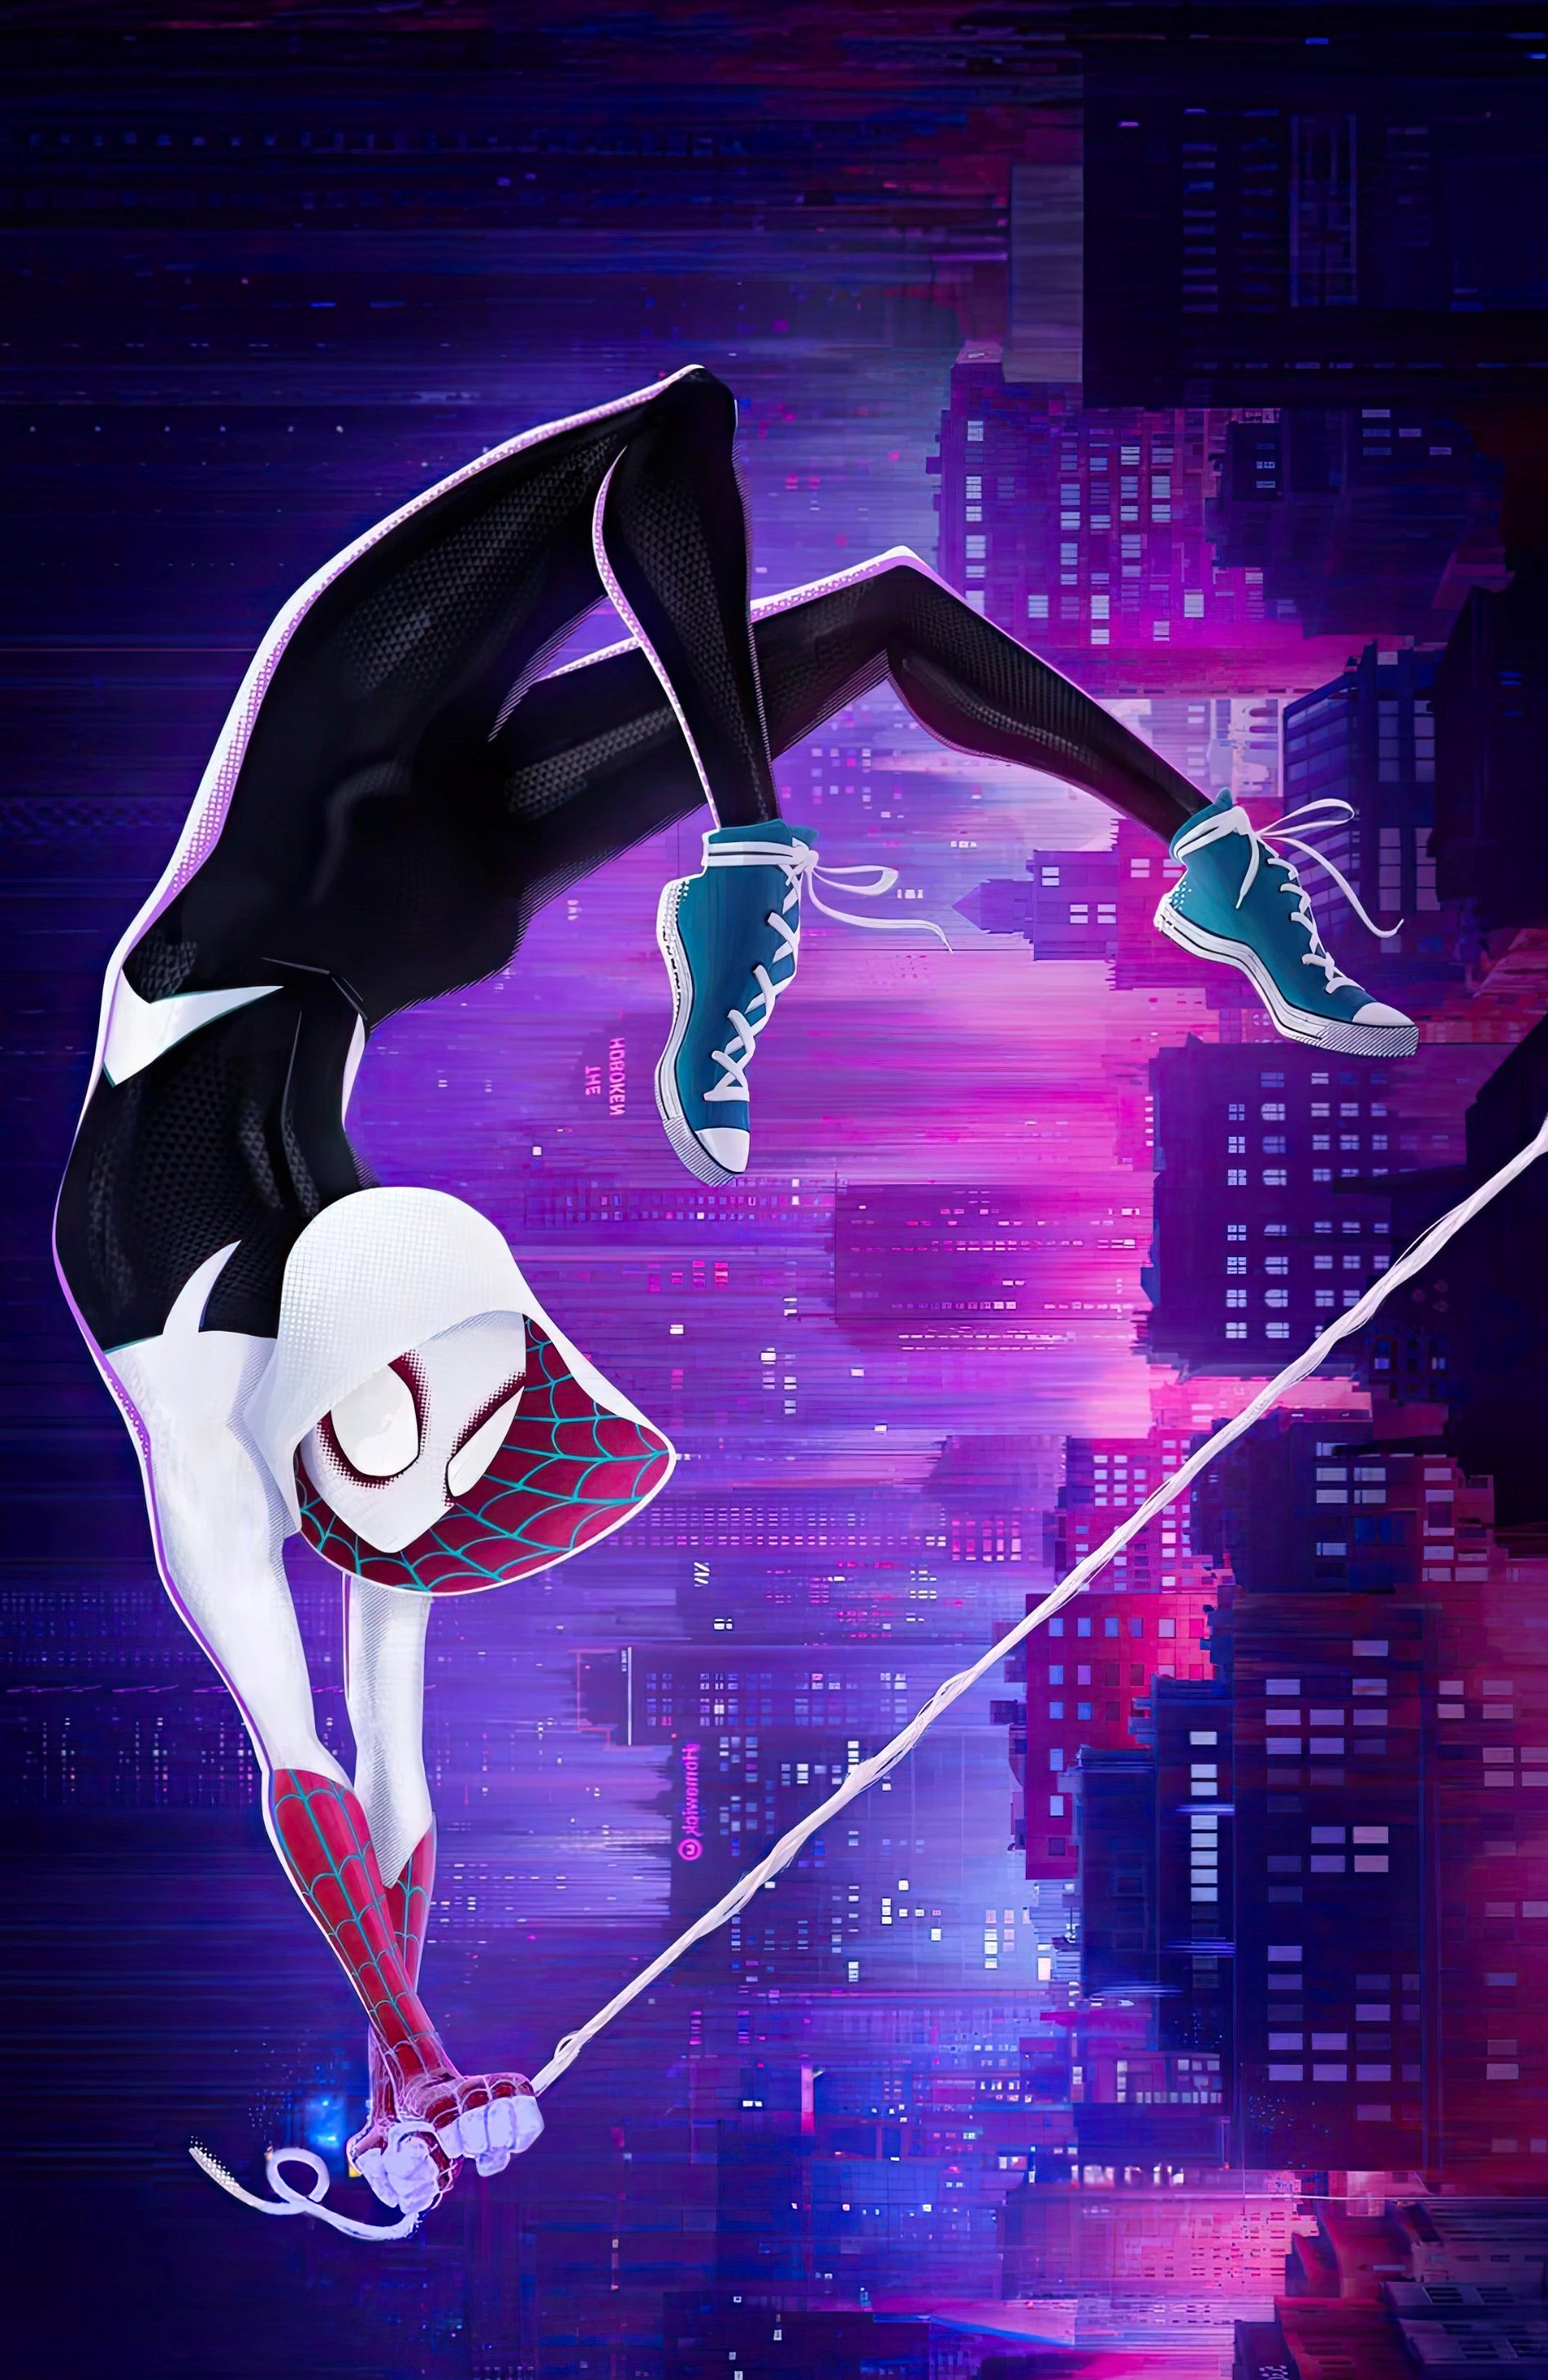 Across The Spider-Verse: Is Gwen Stacy Spider-Woman Or Ghost Spider?